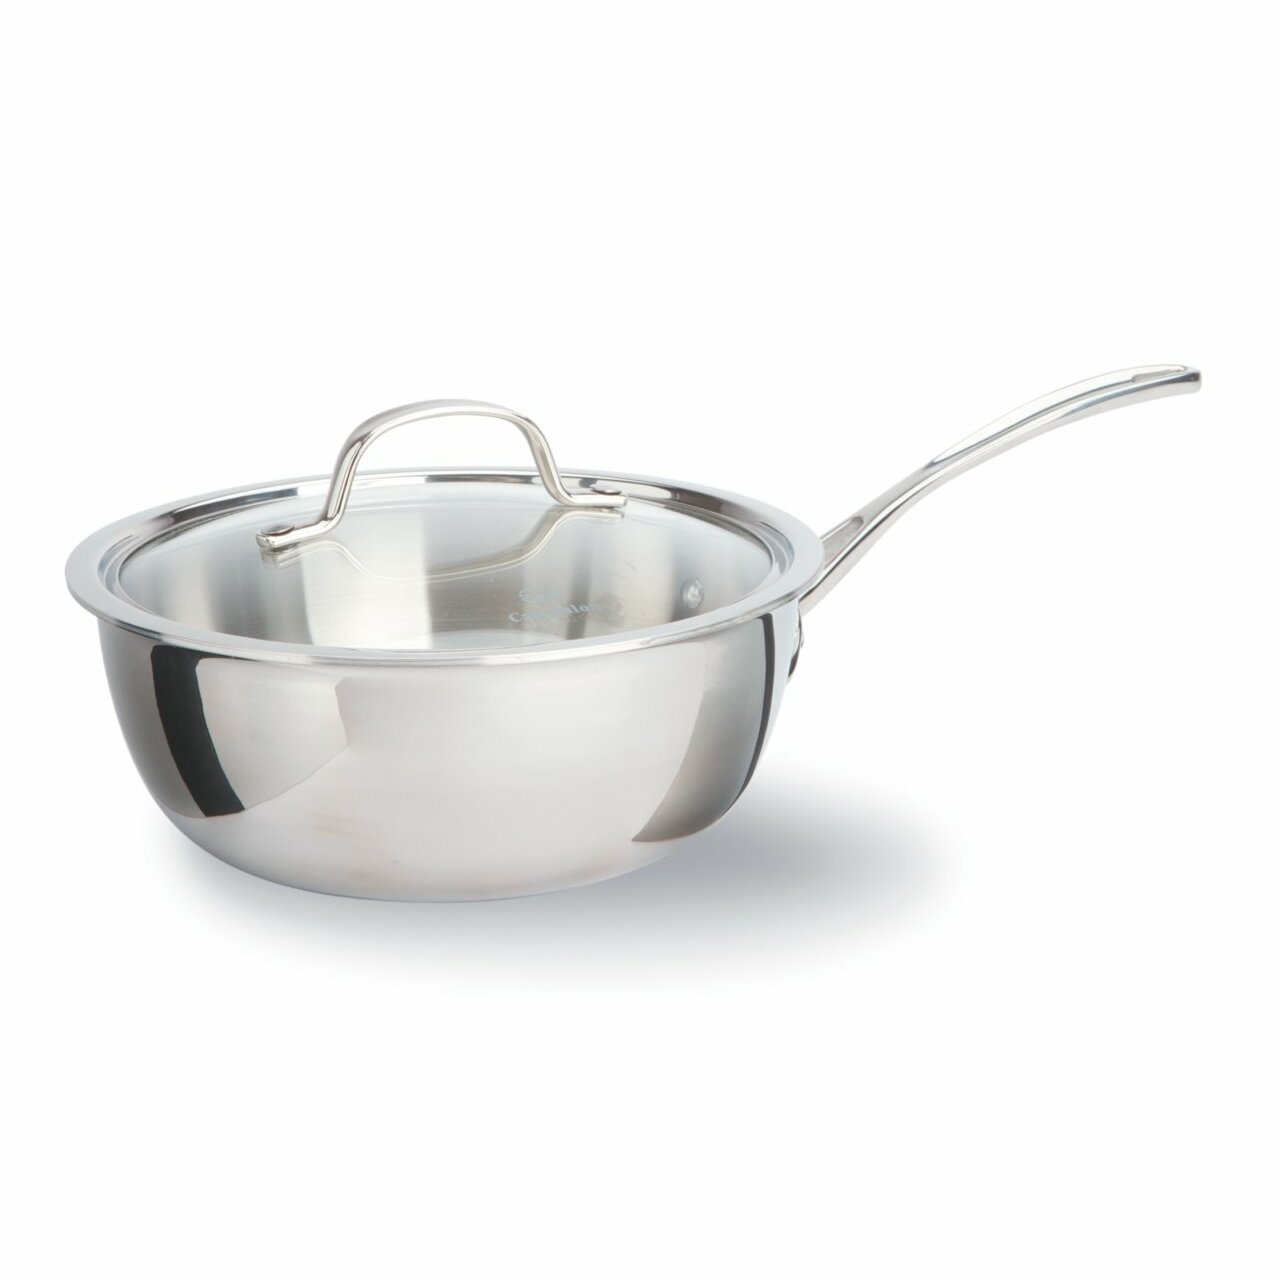 Calphalon Tri-Ply Stainless Steel 3-qt. Chef's Saute Pan with Lid Calphalon 3 Qt Stainless Steel